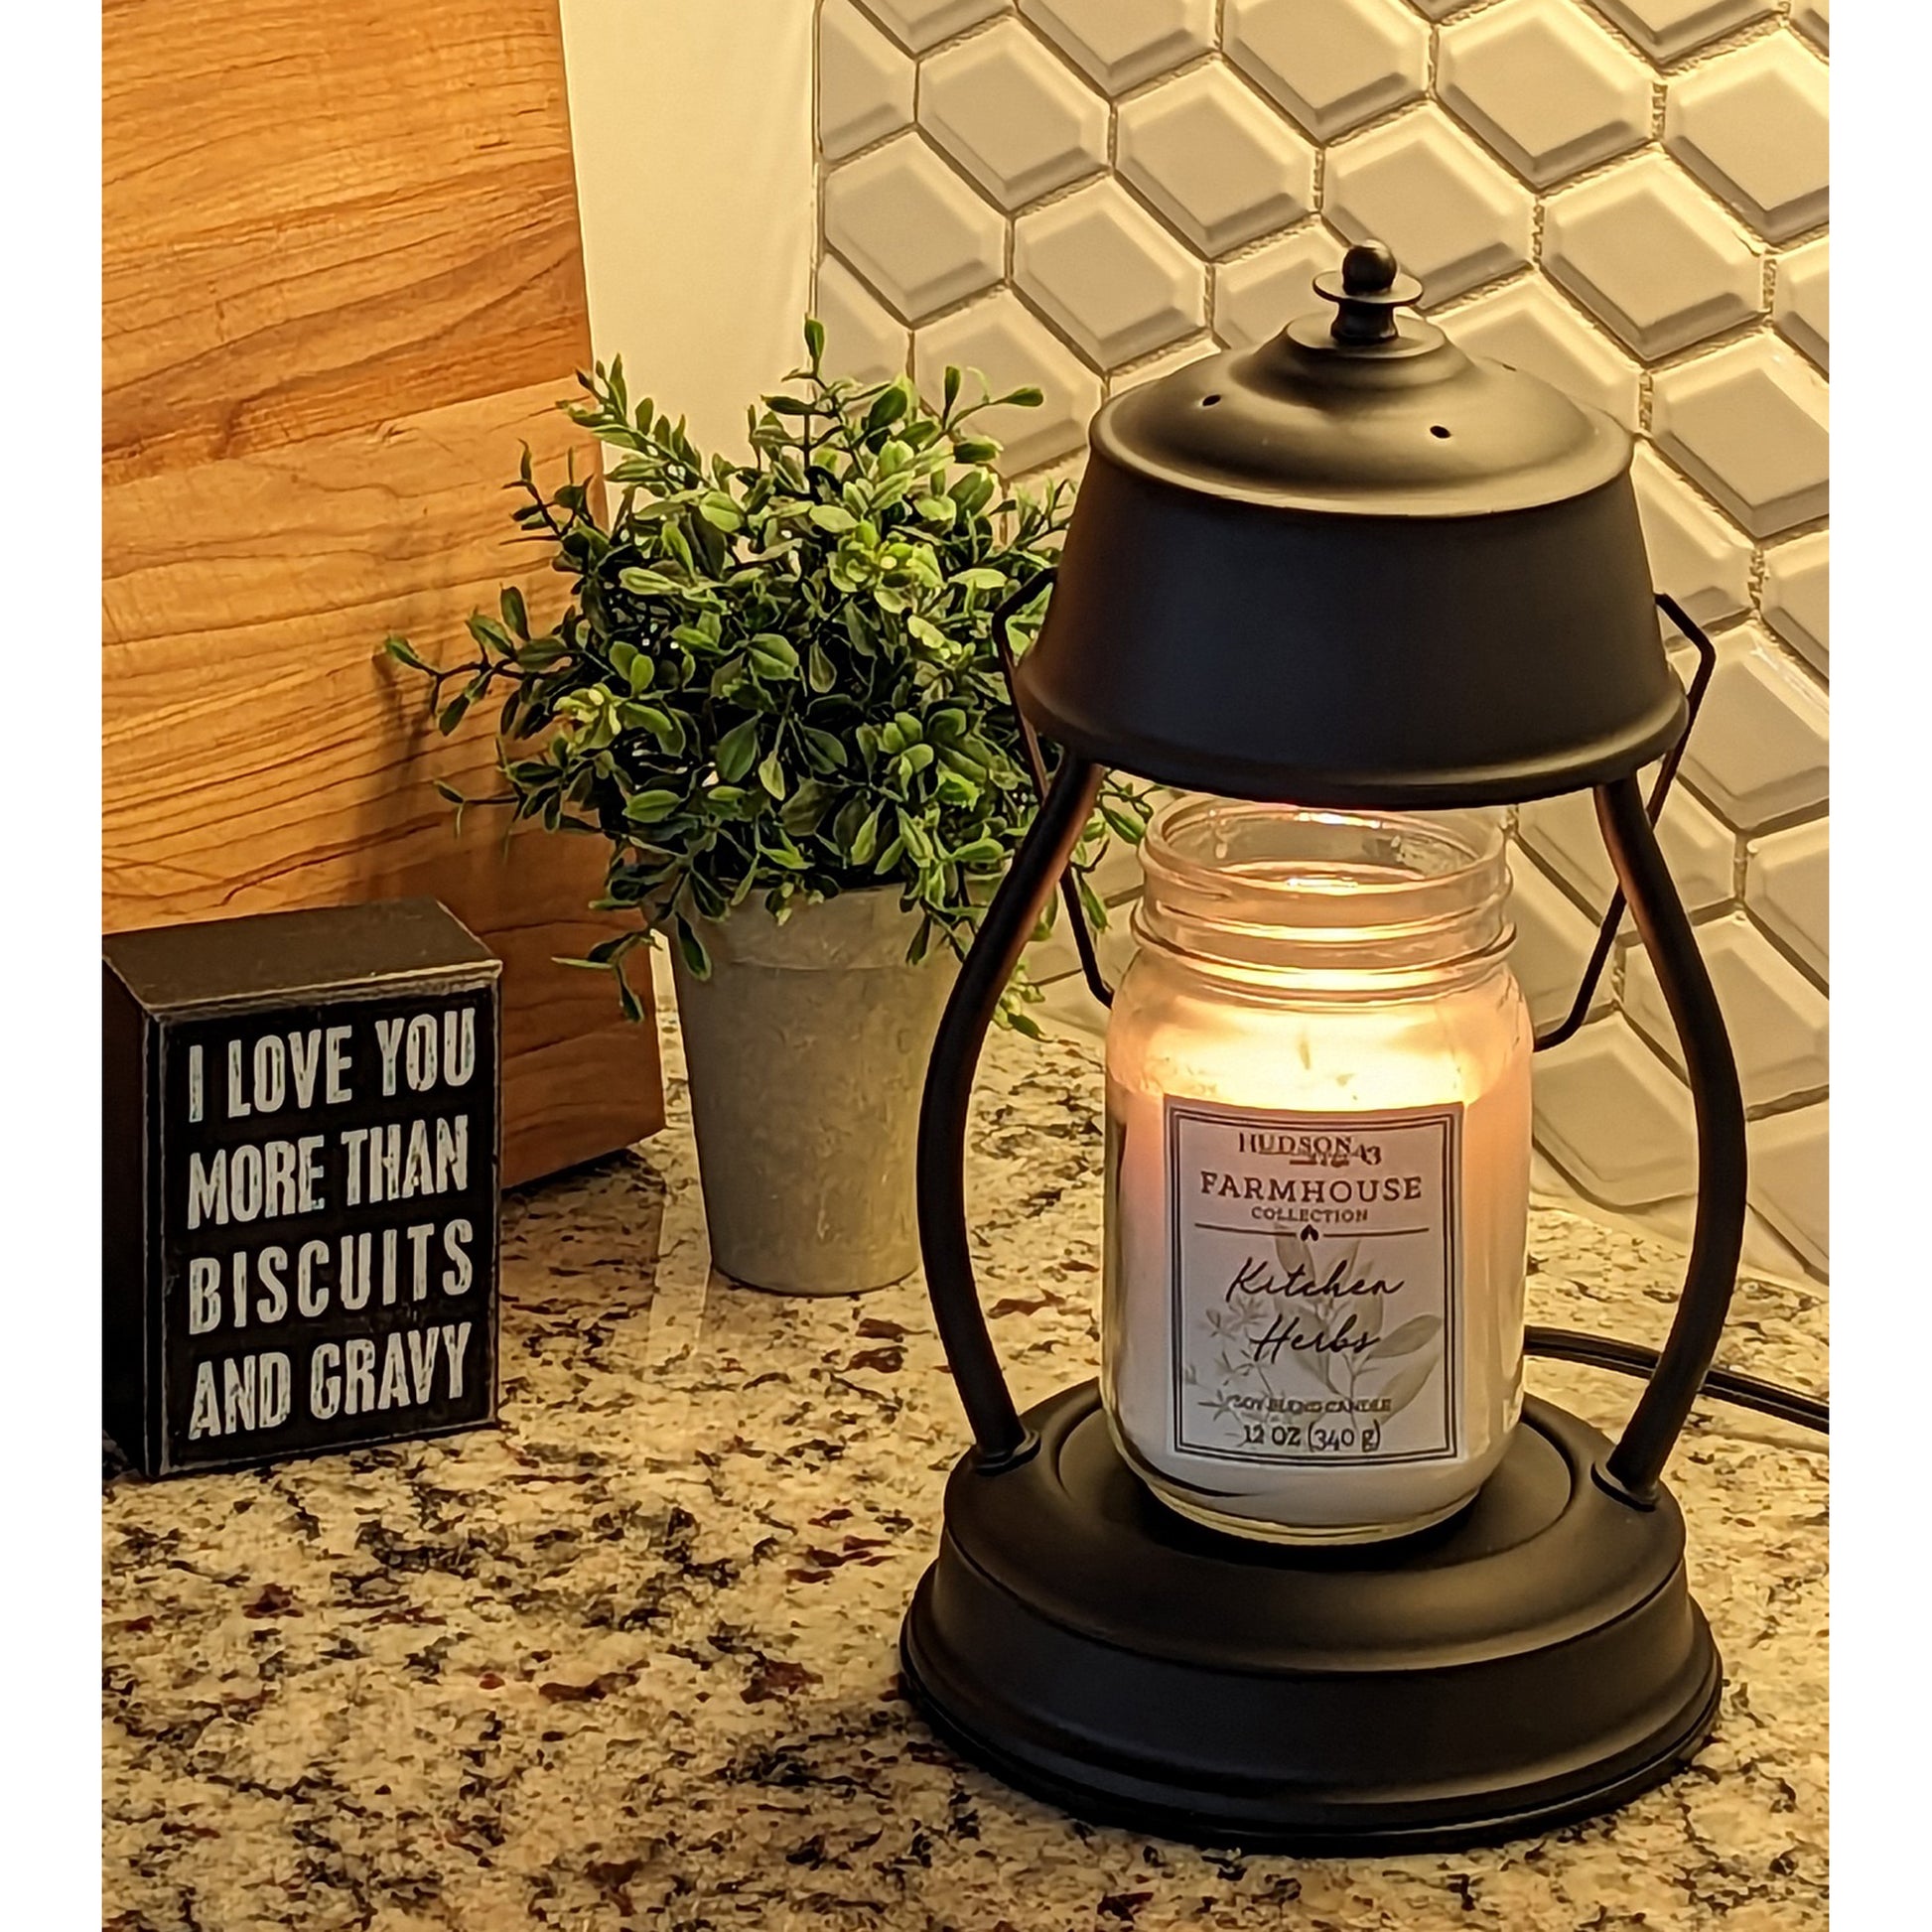 Image, lit black candle warmer on granite countertop in kitchen.